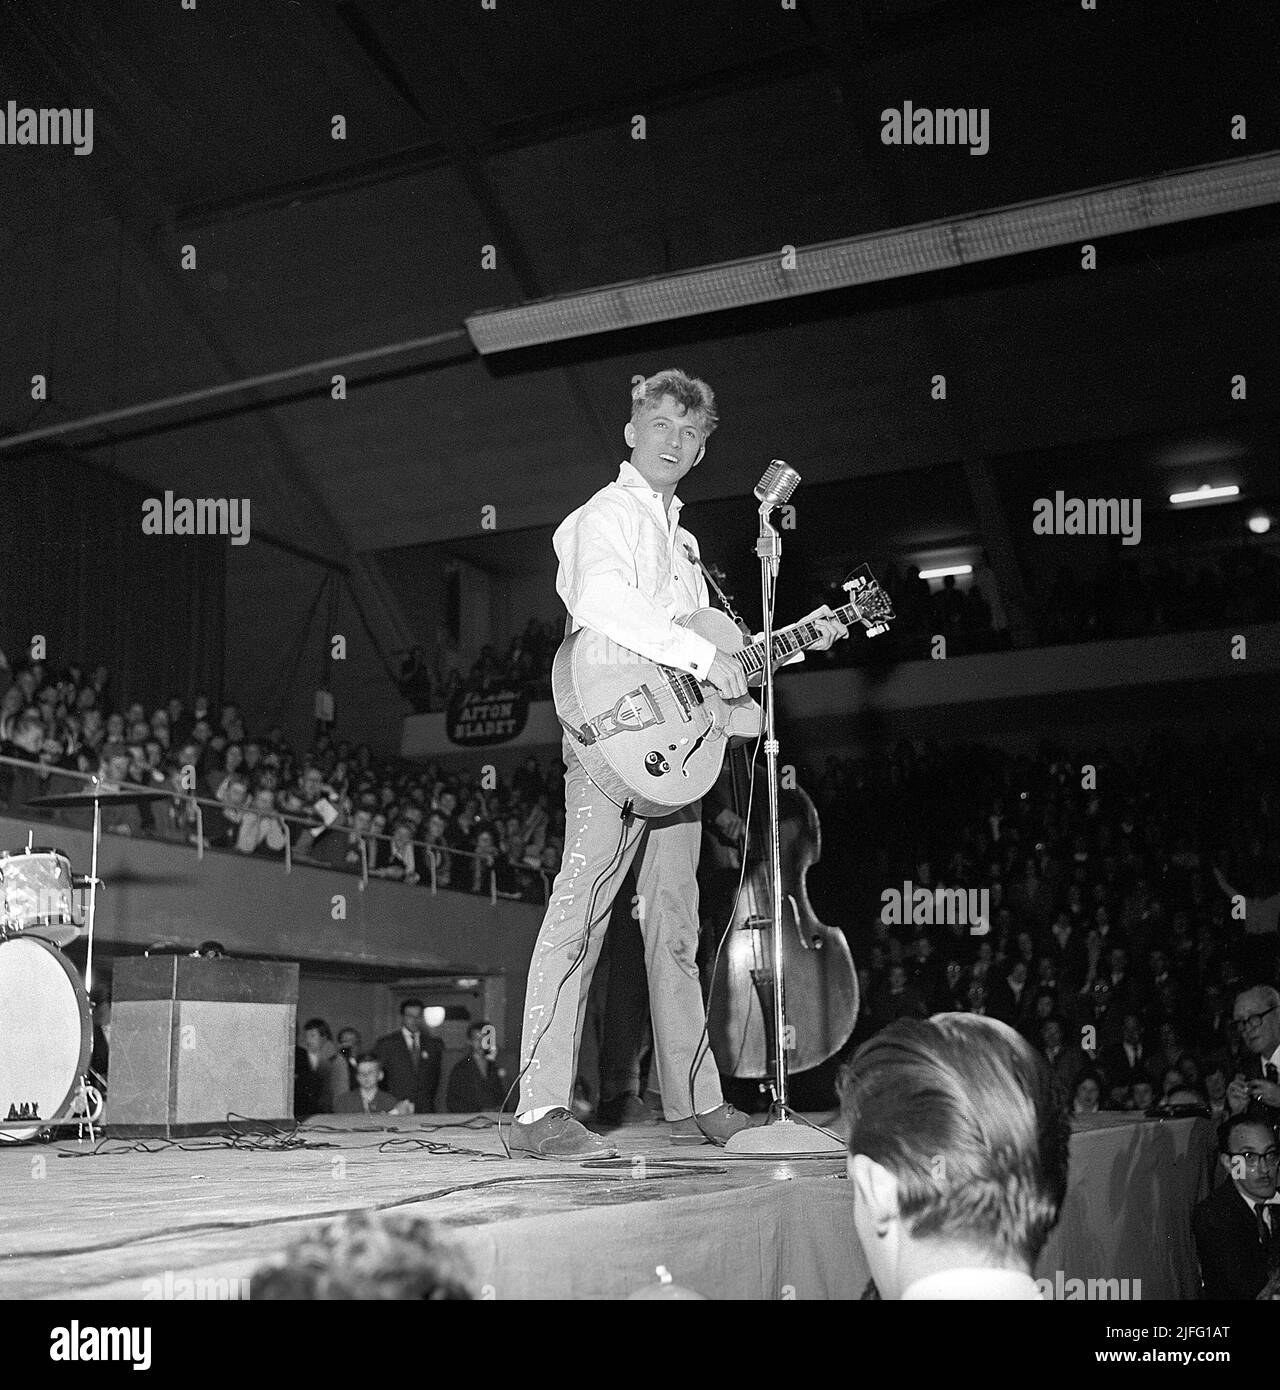 Tommy Steele. English entertainer regarded as Britain's first teen idol and rock and roll star. Born december 17 1936. Picture taken when he performed in Stockholm Sweden April 19 1958. Stock Photo